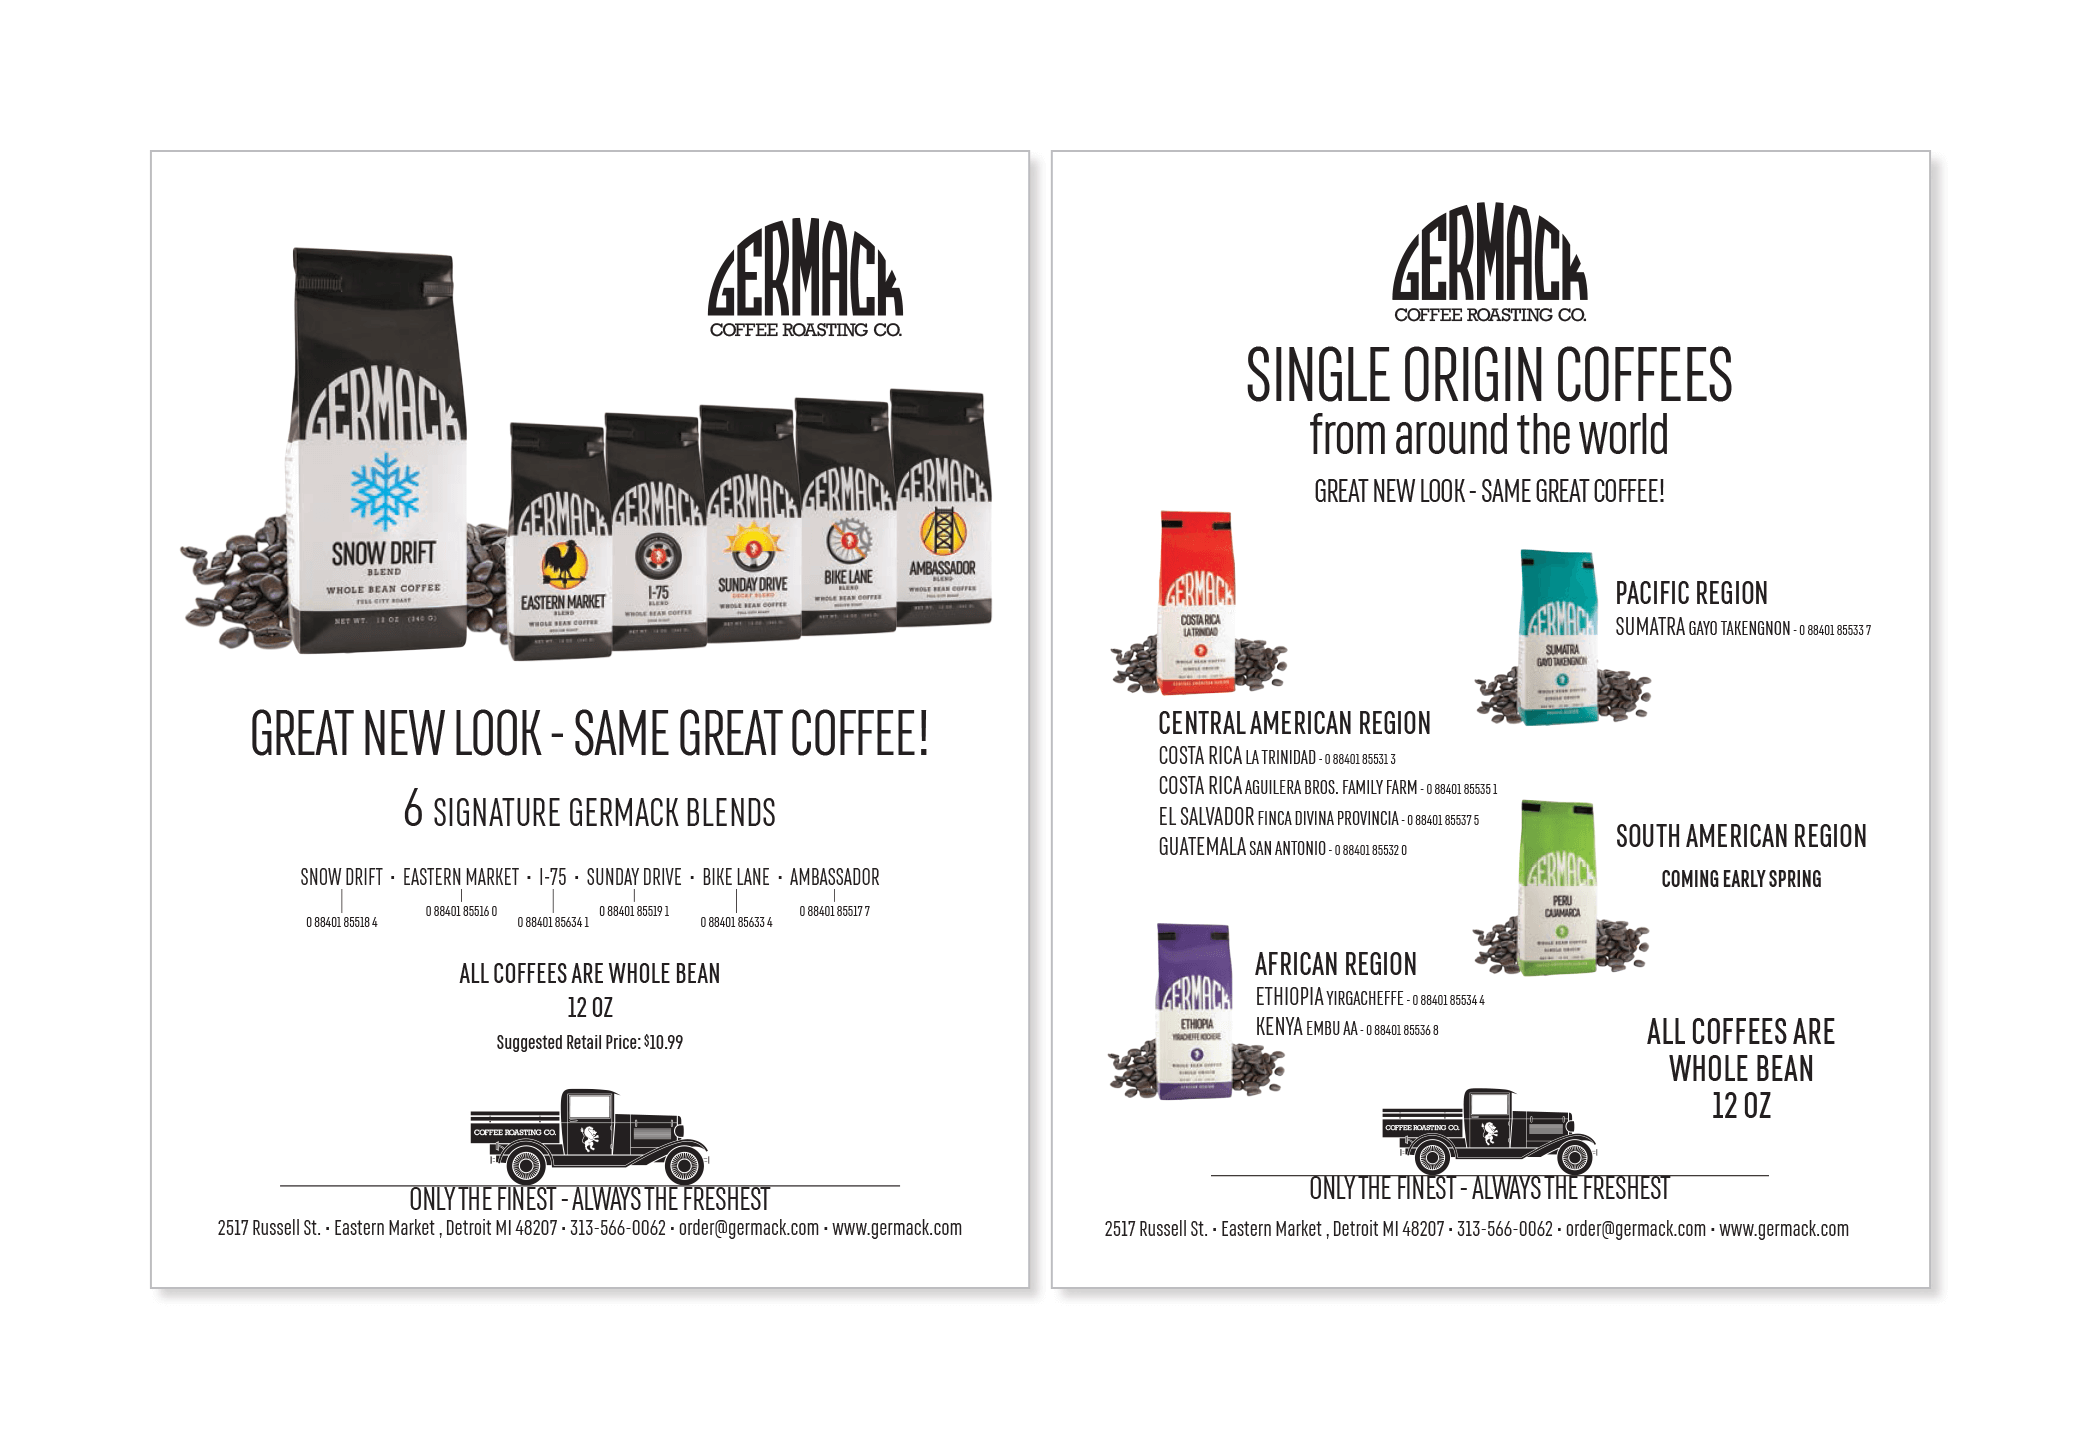 Germack Coffee new packaging announcement and single origins flyers